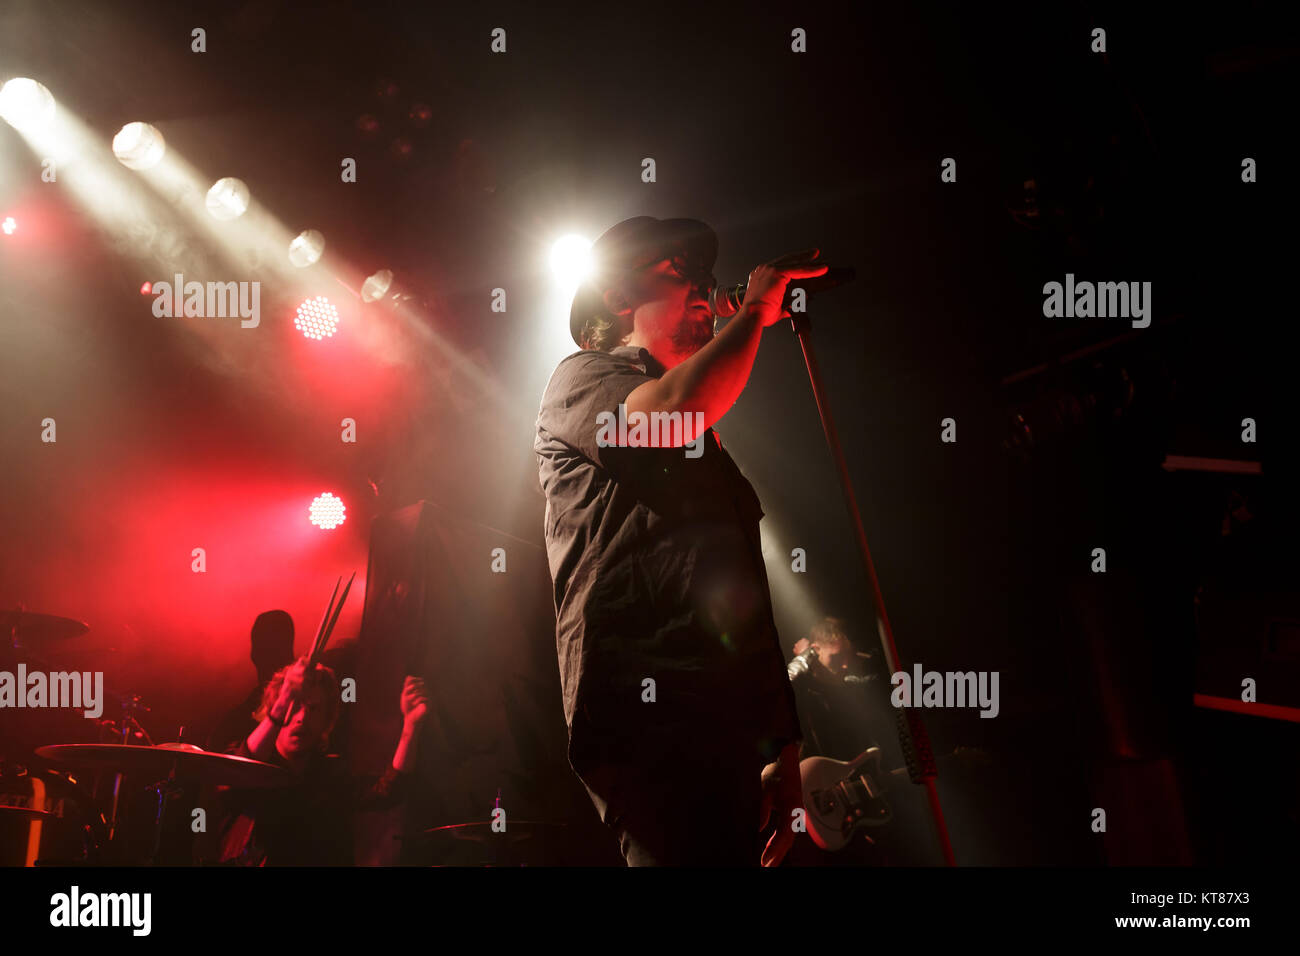 The Swedish rock band Dead Soul performs a live concert at Kulturbolaget in Malmö. Here vocalist Anders Landelius is seen live on stage. Sweden, 04/10 2014. Stock Photo